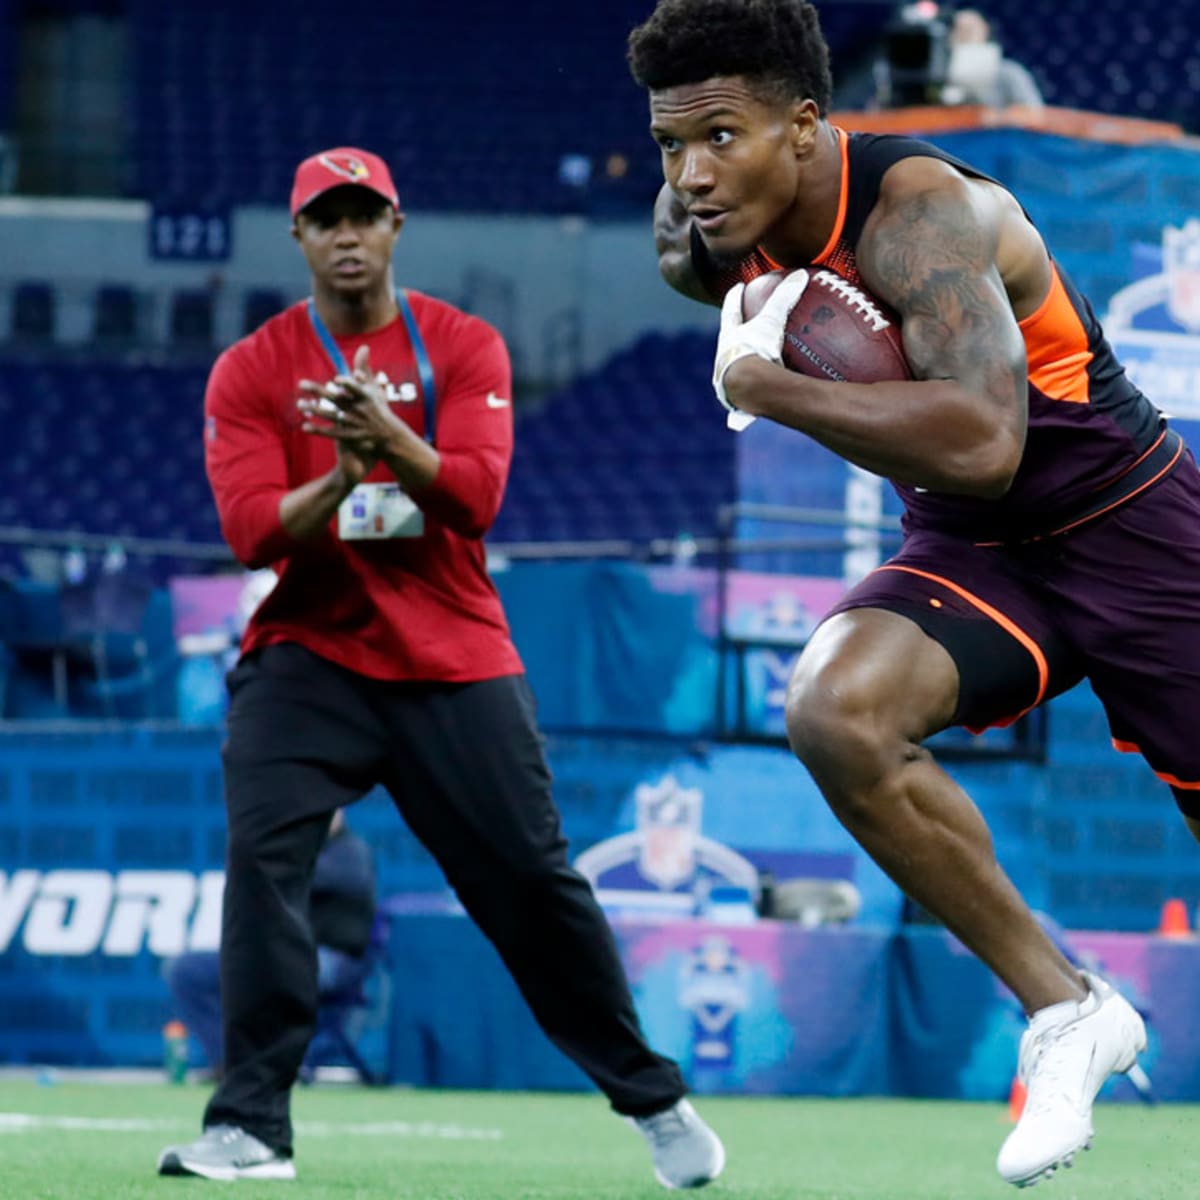 The NFL combine is changing into a TV show - Sports Illustrated